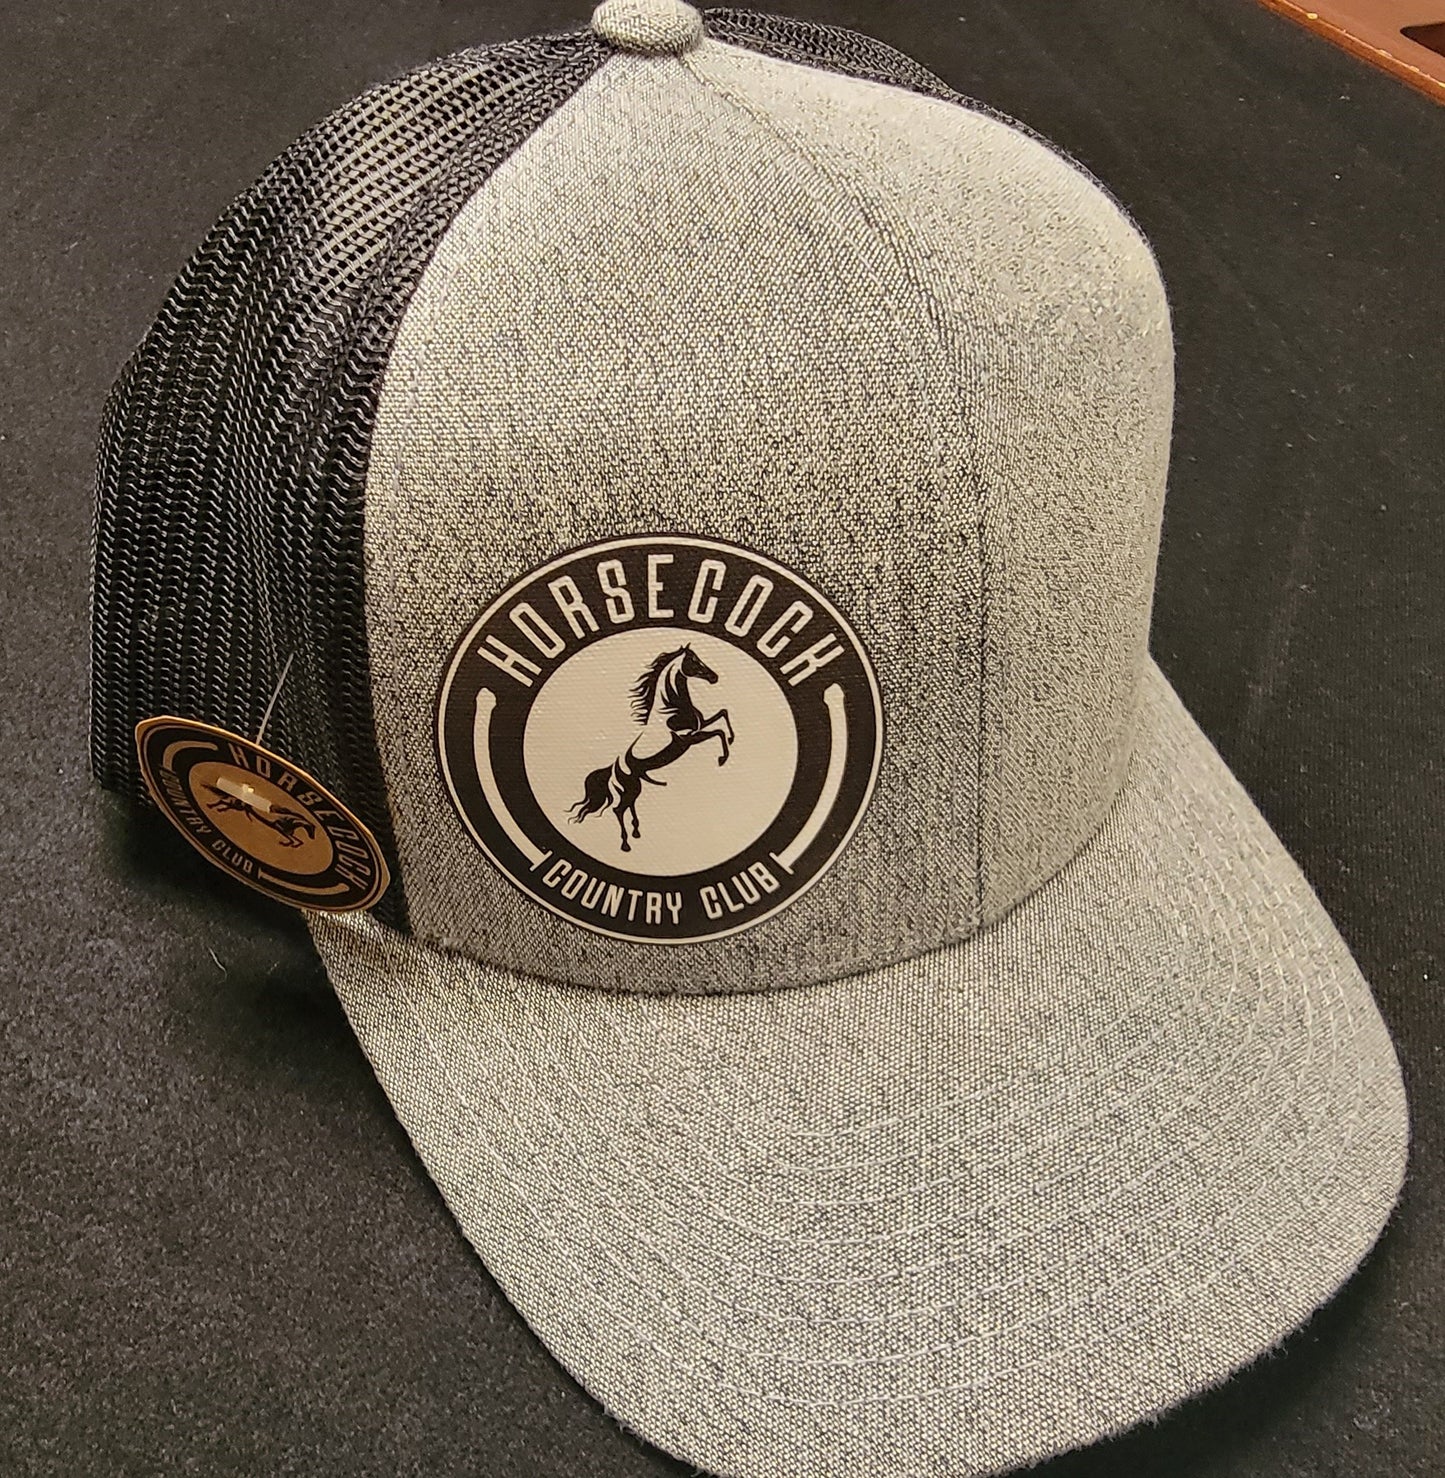 Horsecock Country Club Trucker Hat